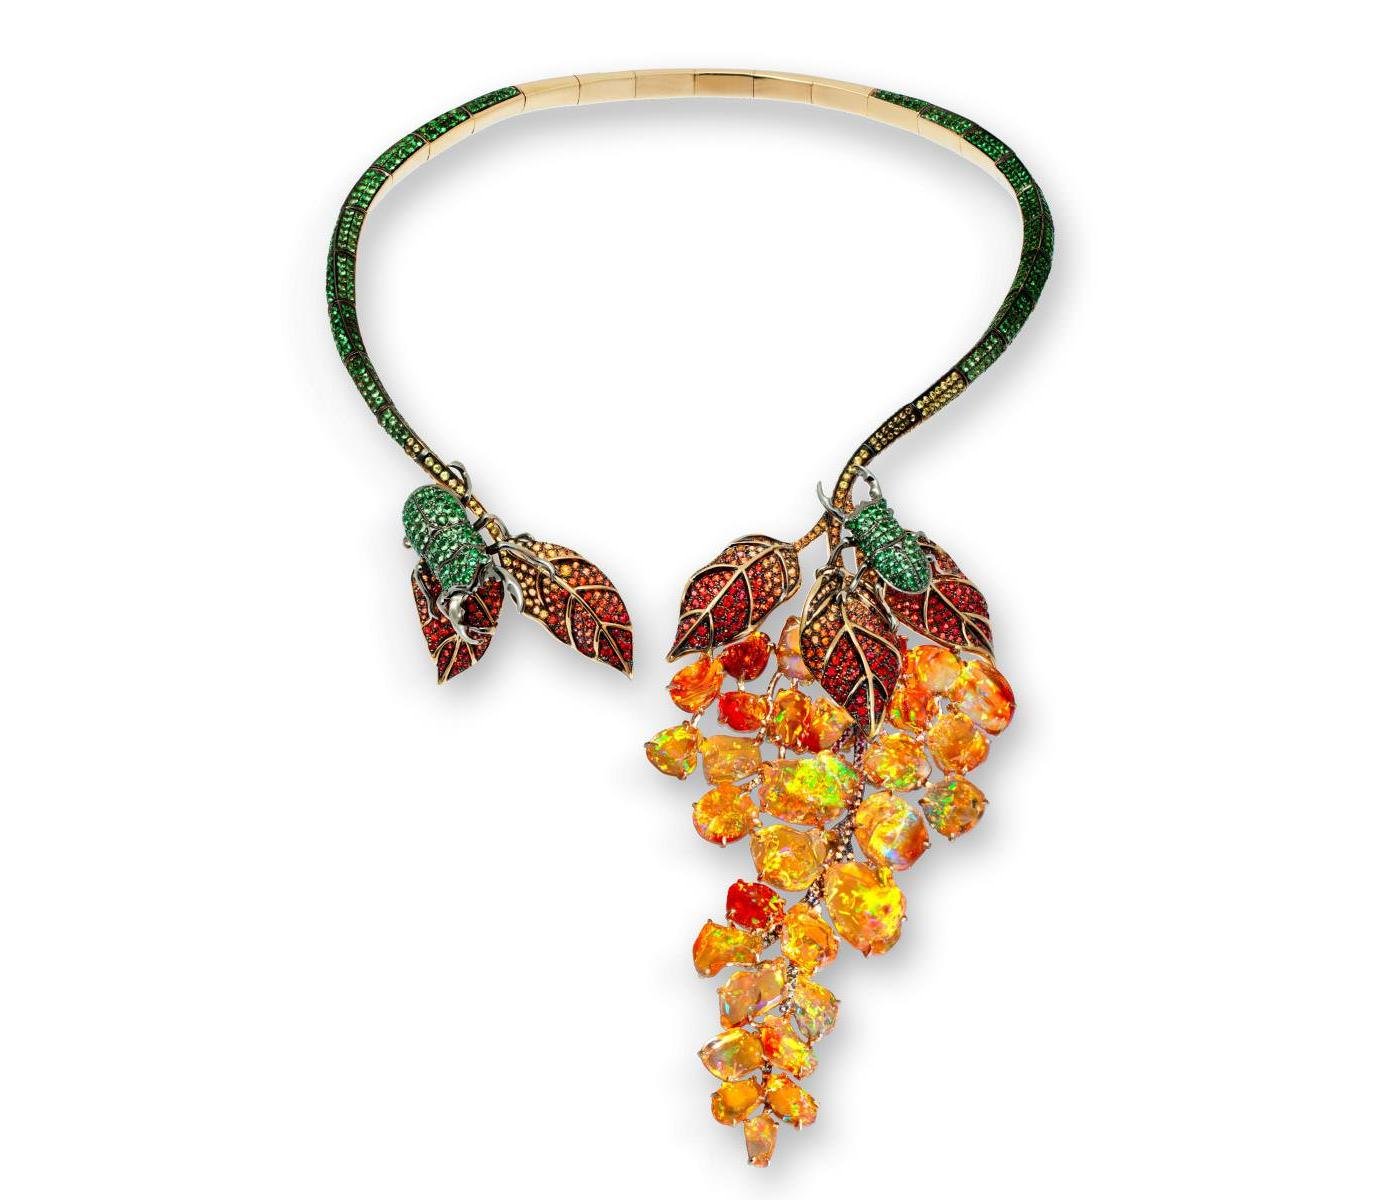 Necklace by Lydia Courteille